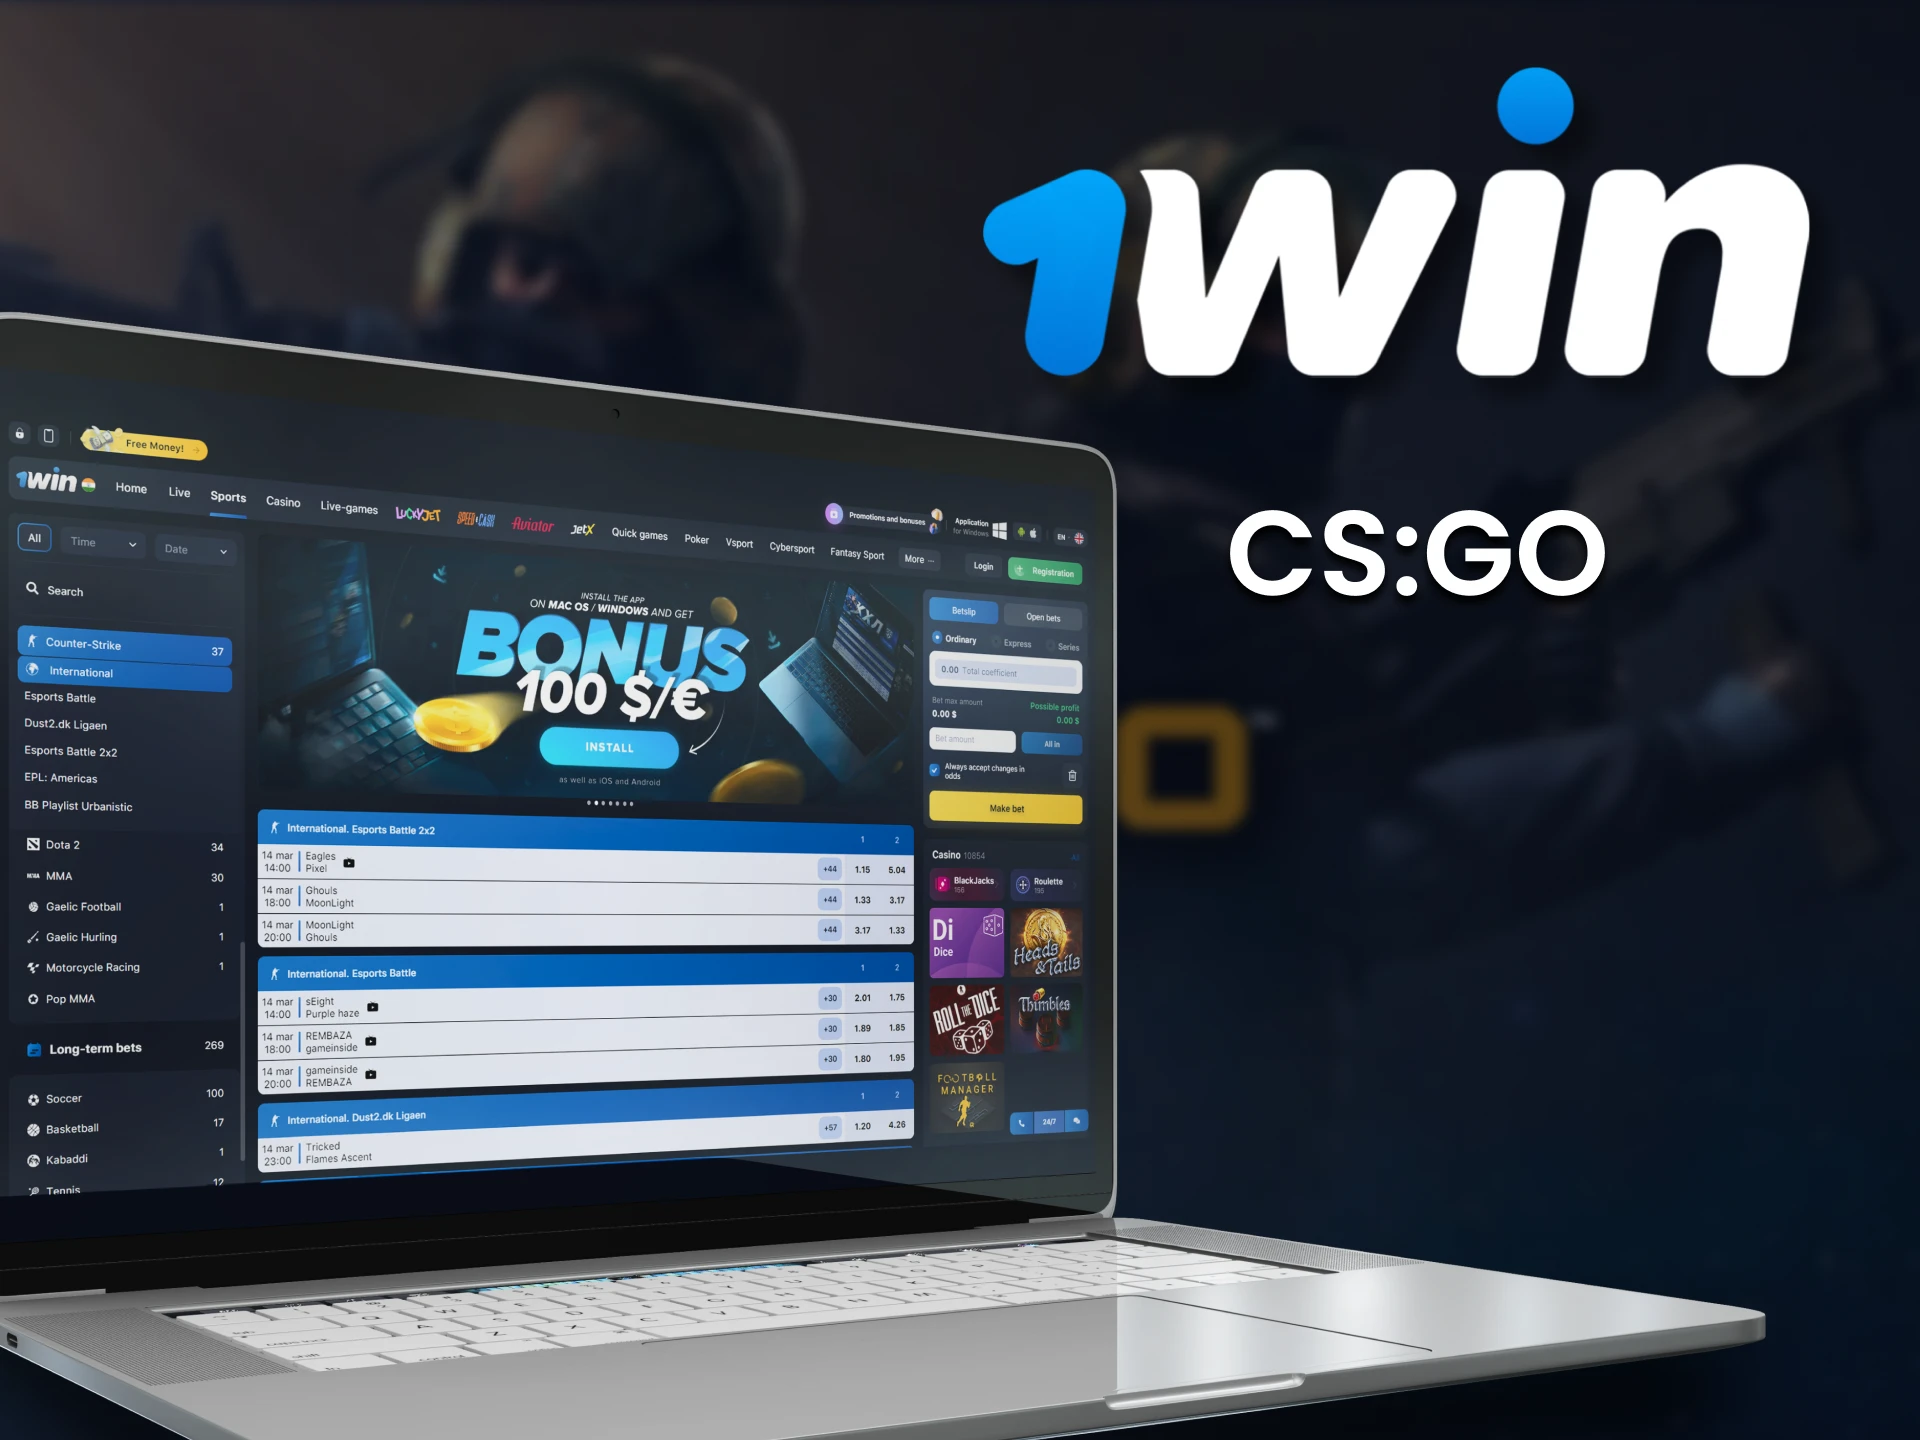 Place your bet on CS:GO at 1win.